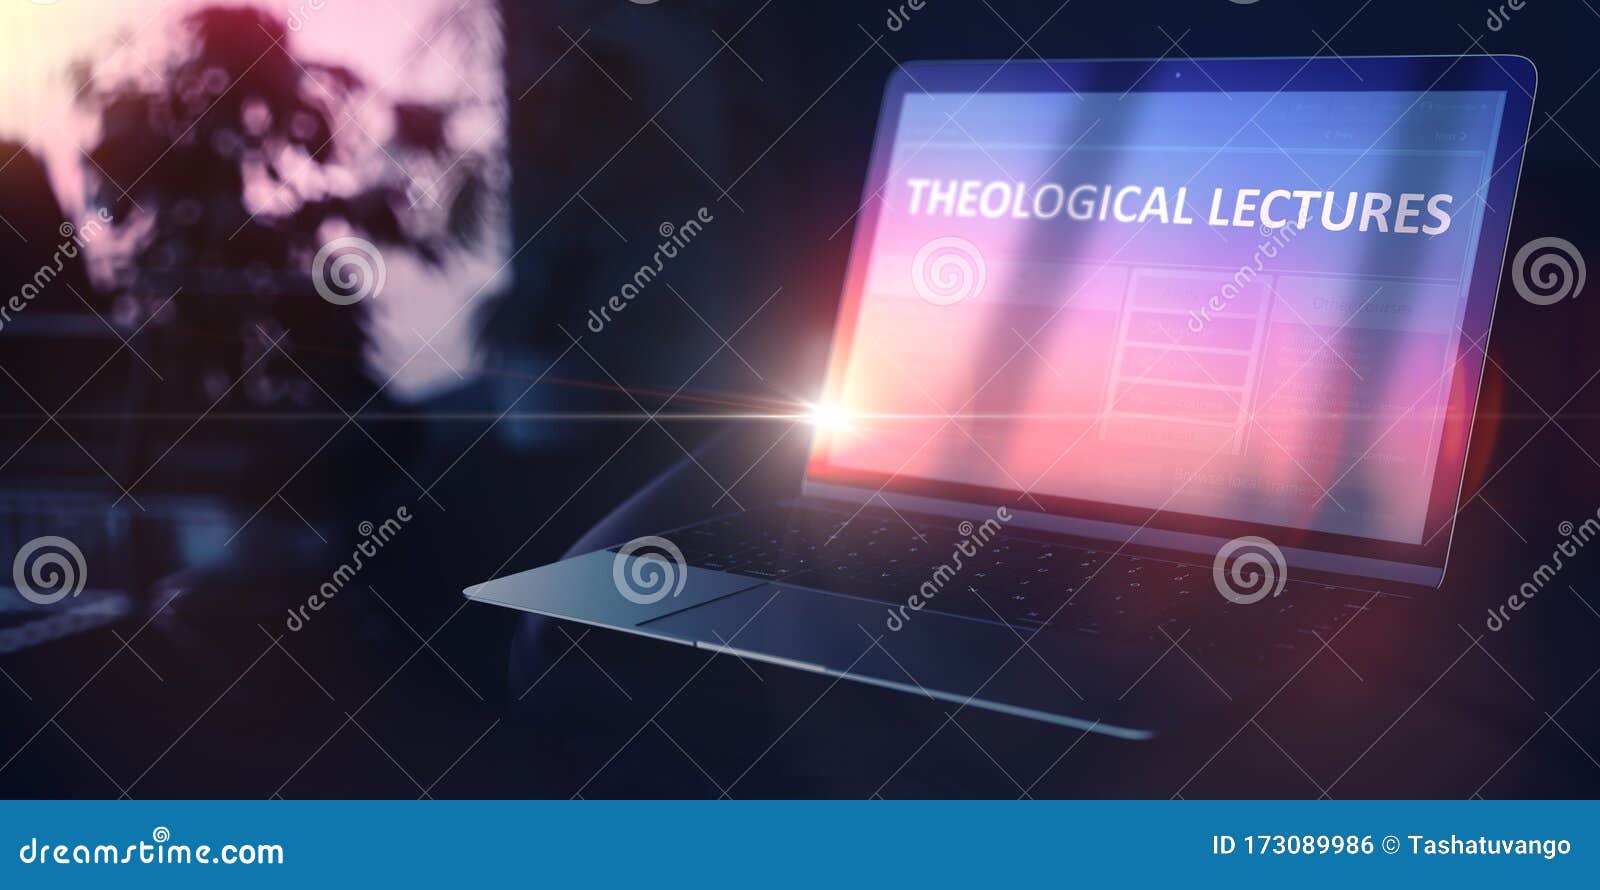 university extension concept. theological lectures on ultrabook. 3d.